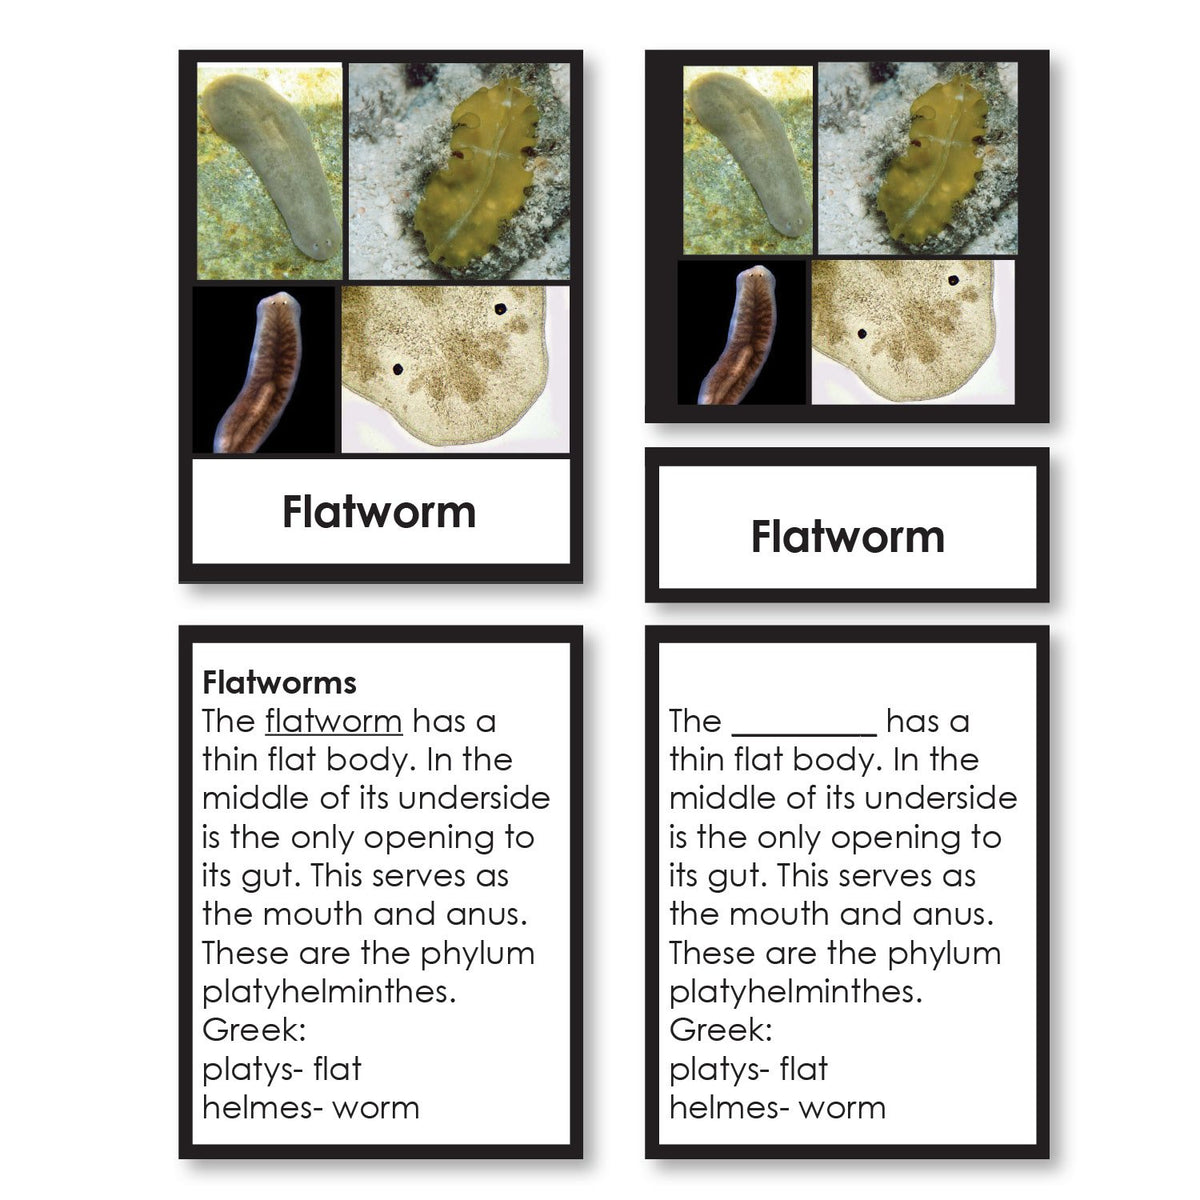 Animal Kingdom Classification 3-Part Cards with Definitions